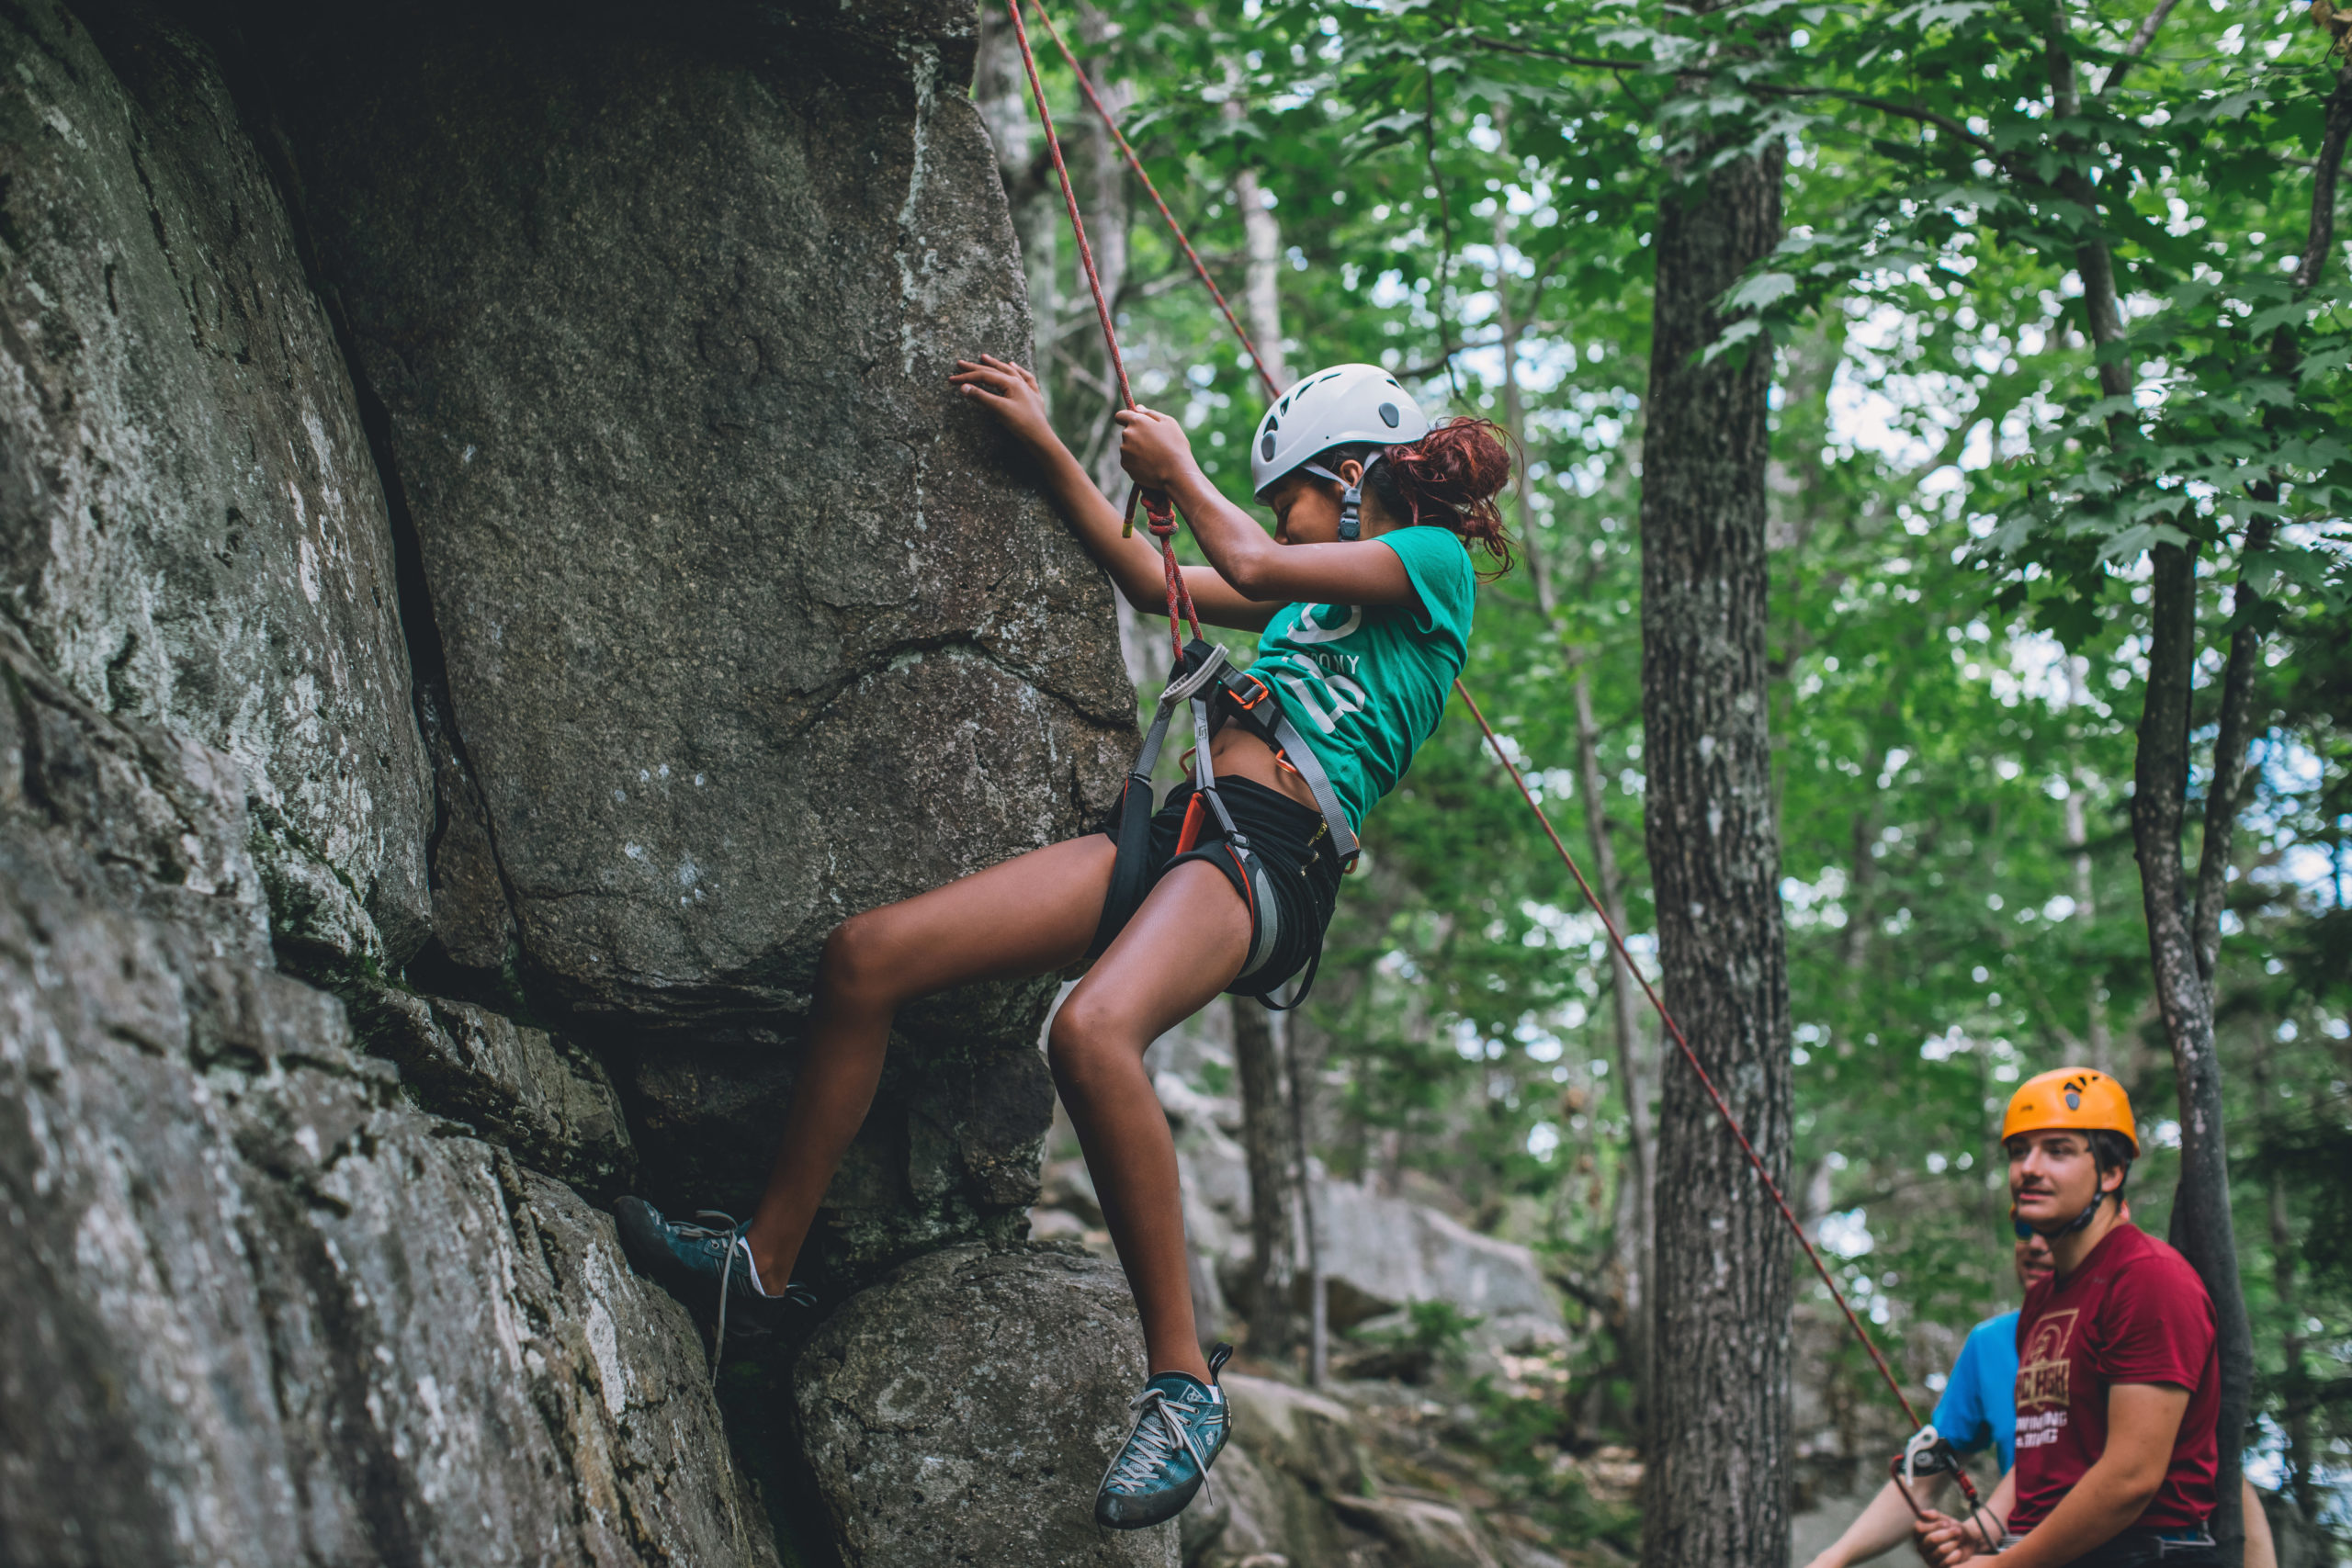 July 15, 2019. Boulder Loop Ledges, Moat Range, White Mountain National Forest, New Hampshire-- Teen Wilderness Adventure climbing program. Photo by Paula Champagne.